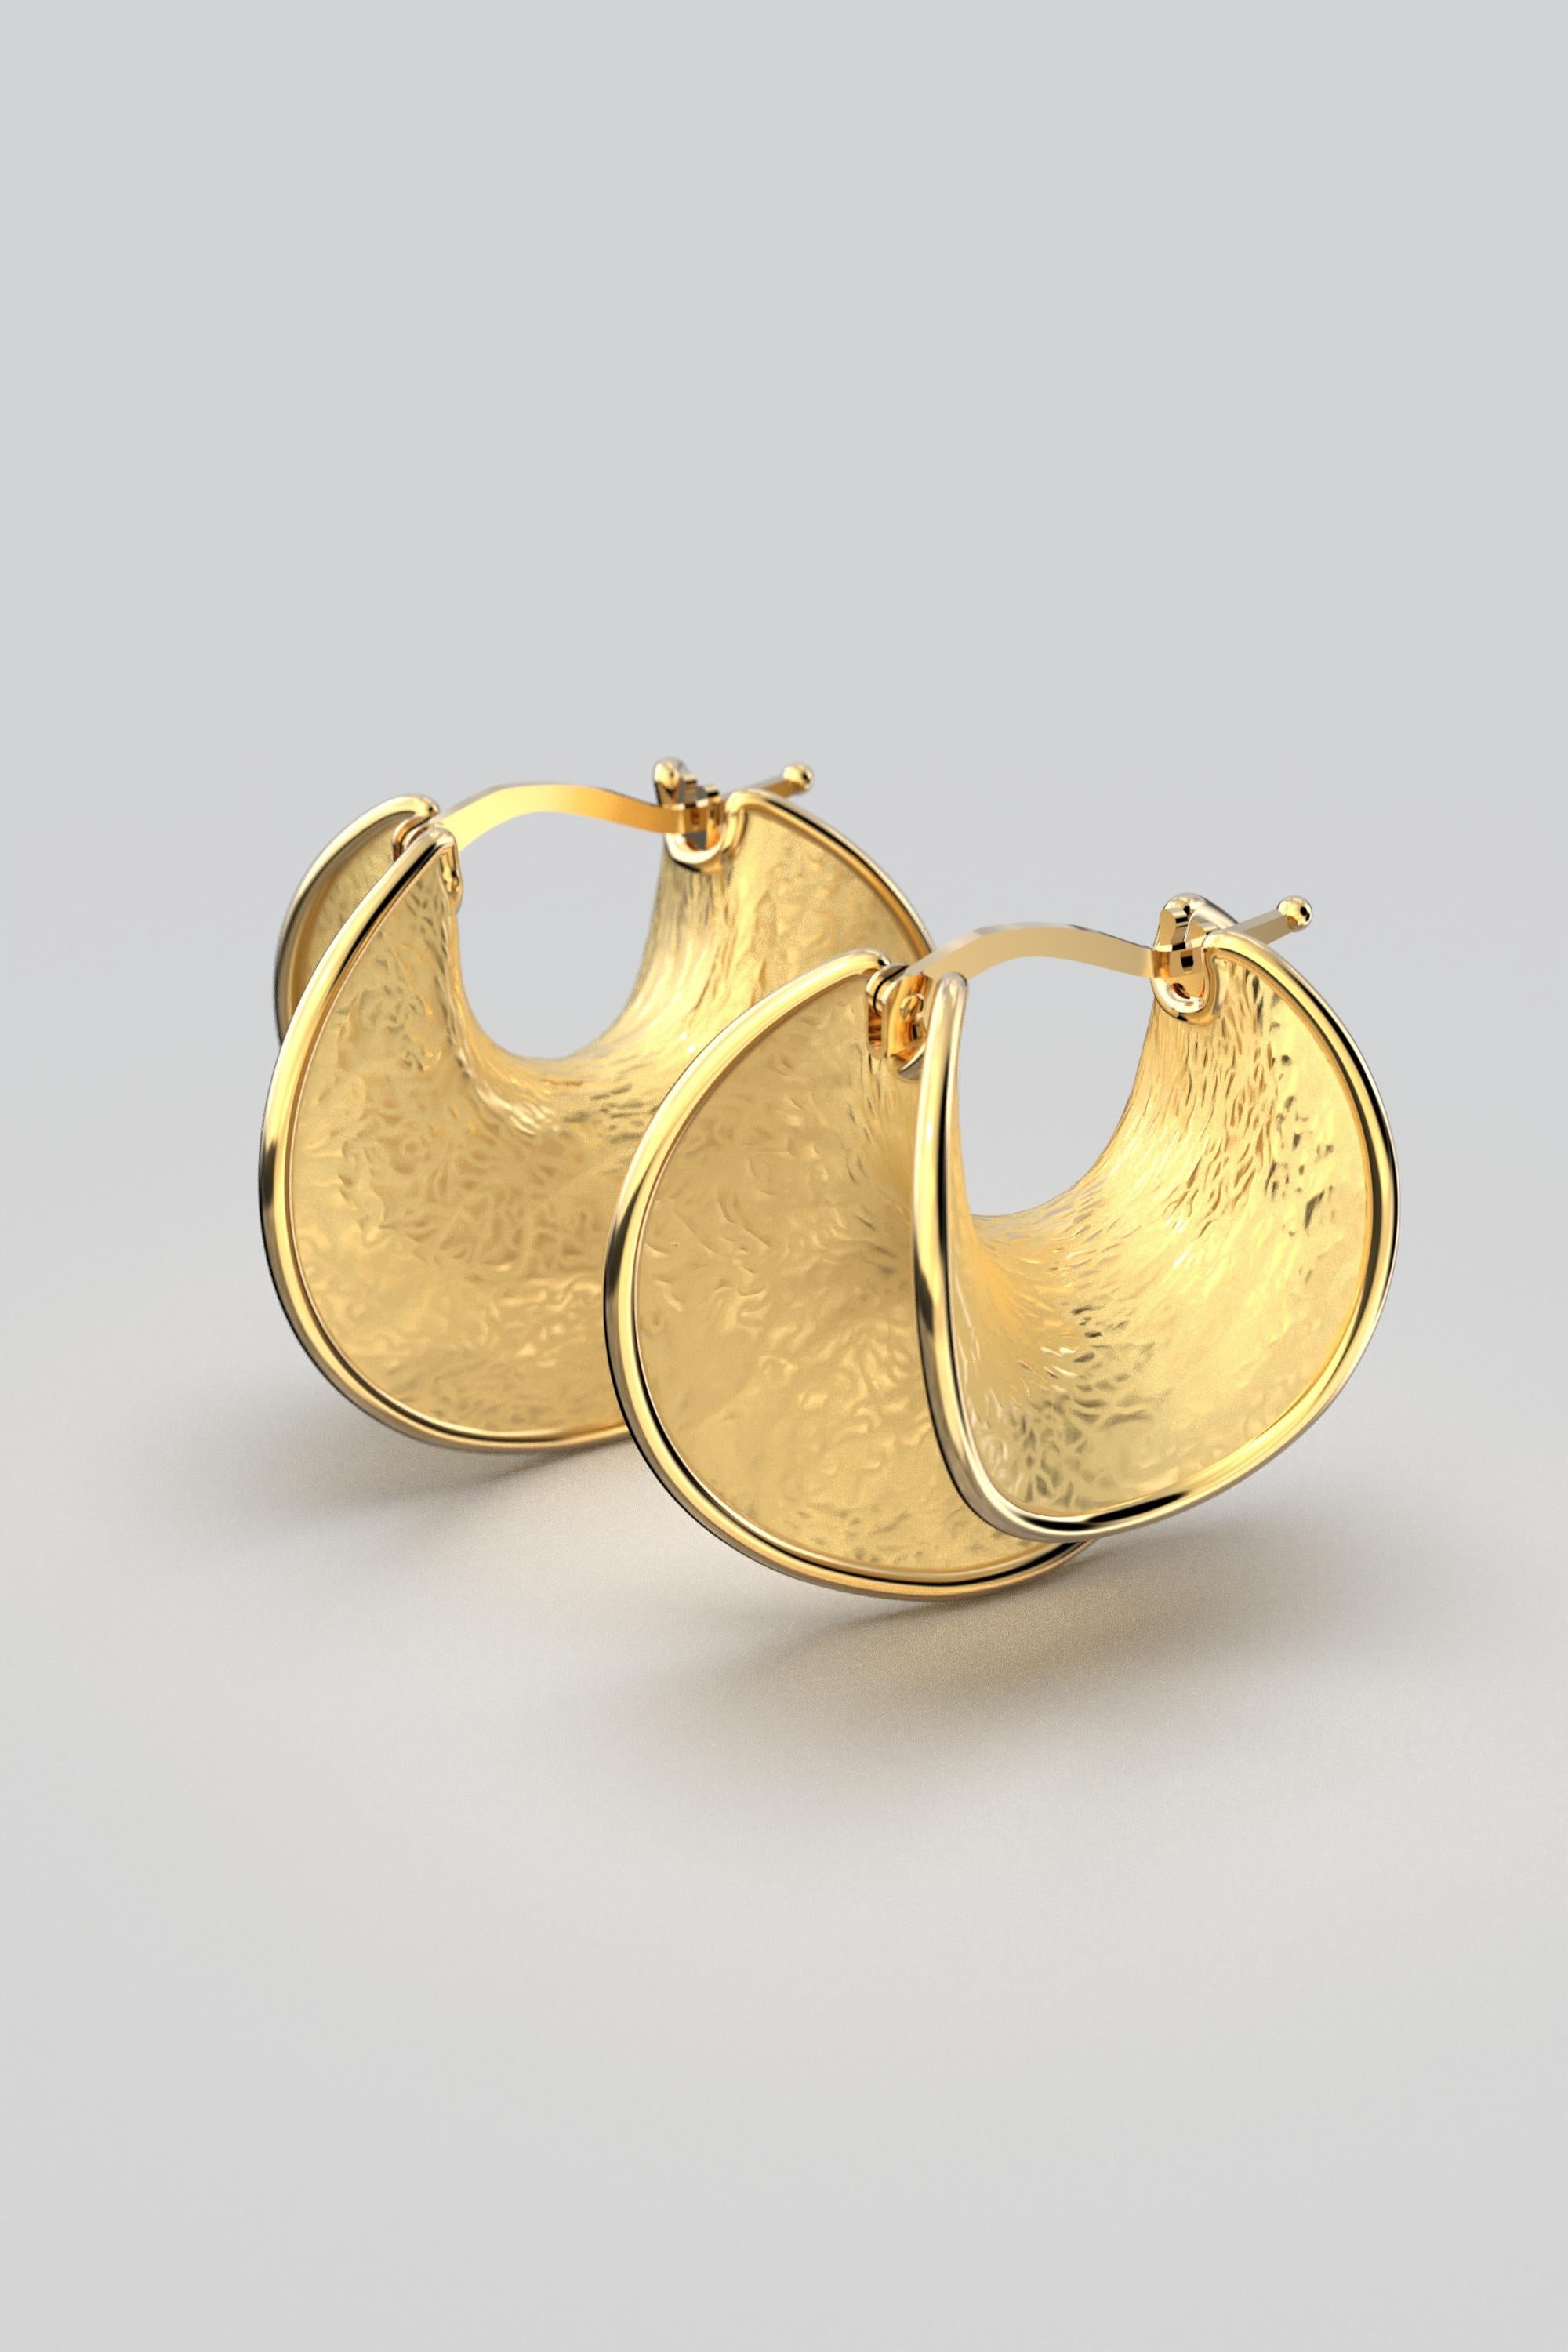 ✨ Elevate your sophistication with our  made to order exquisite 27mm Diameter Hoop Earrings! ✨

Experience the perfect blend of contemporary flair and timeless allure with these stunning hoop earrings, meticulously crafted in polished or raw 18k